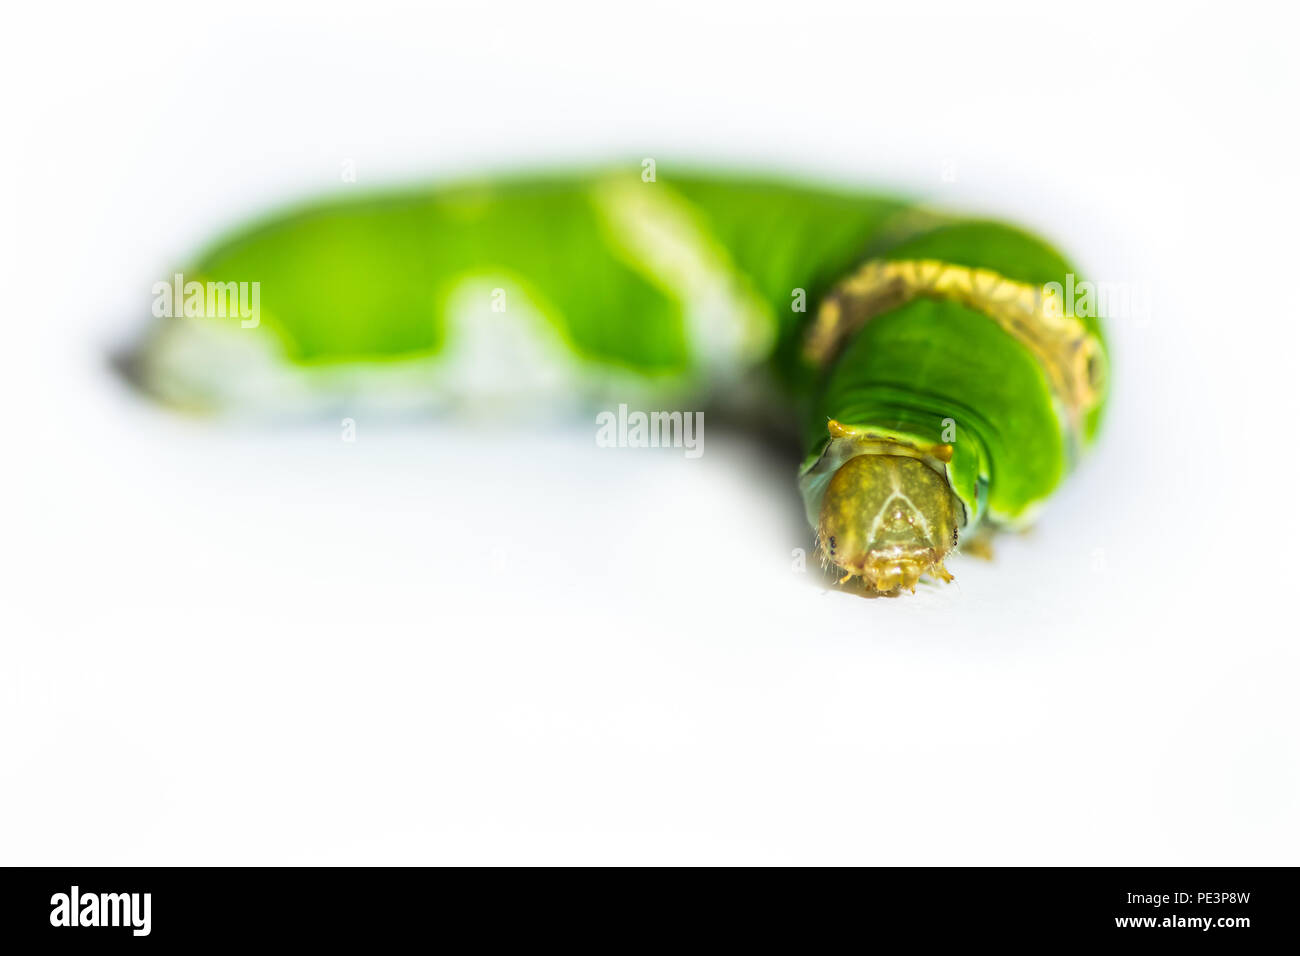 Caterpillar worm green on white background close up Stock Photo